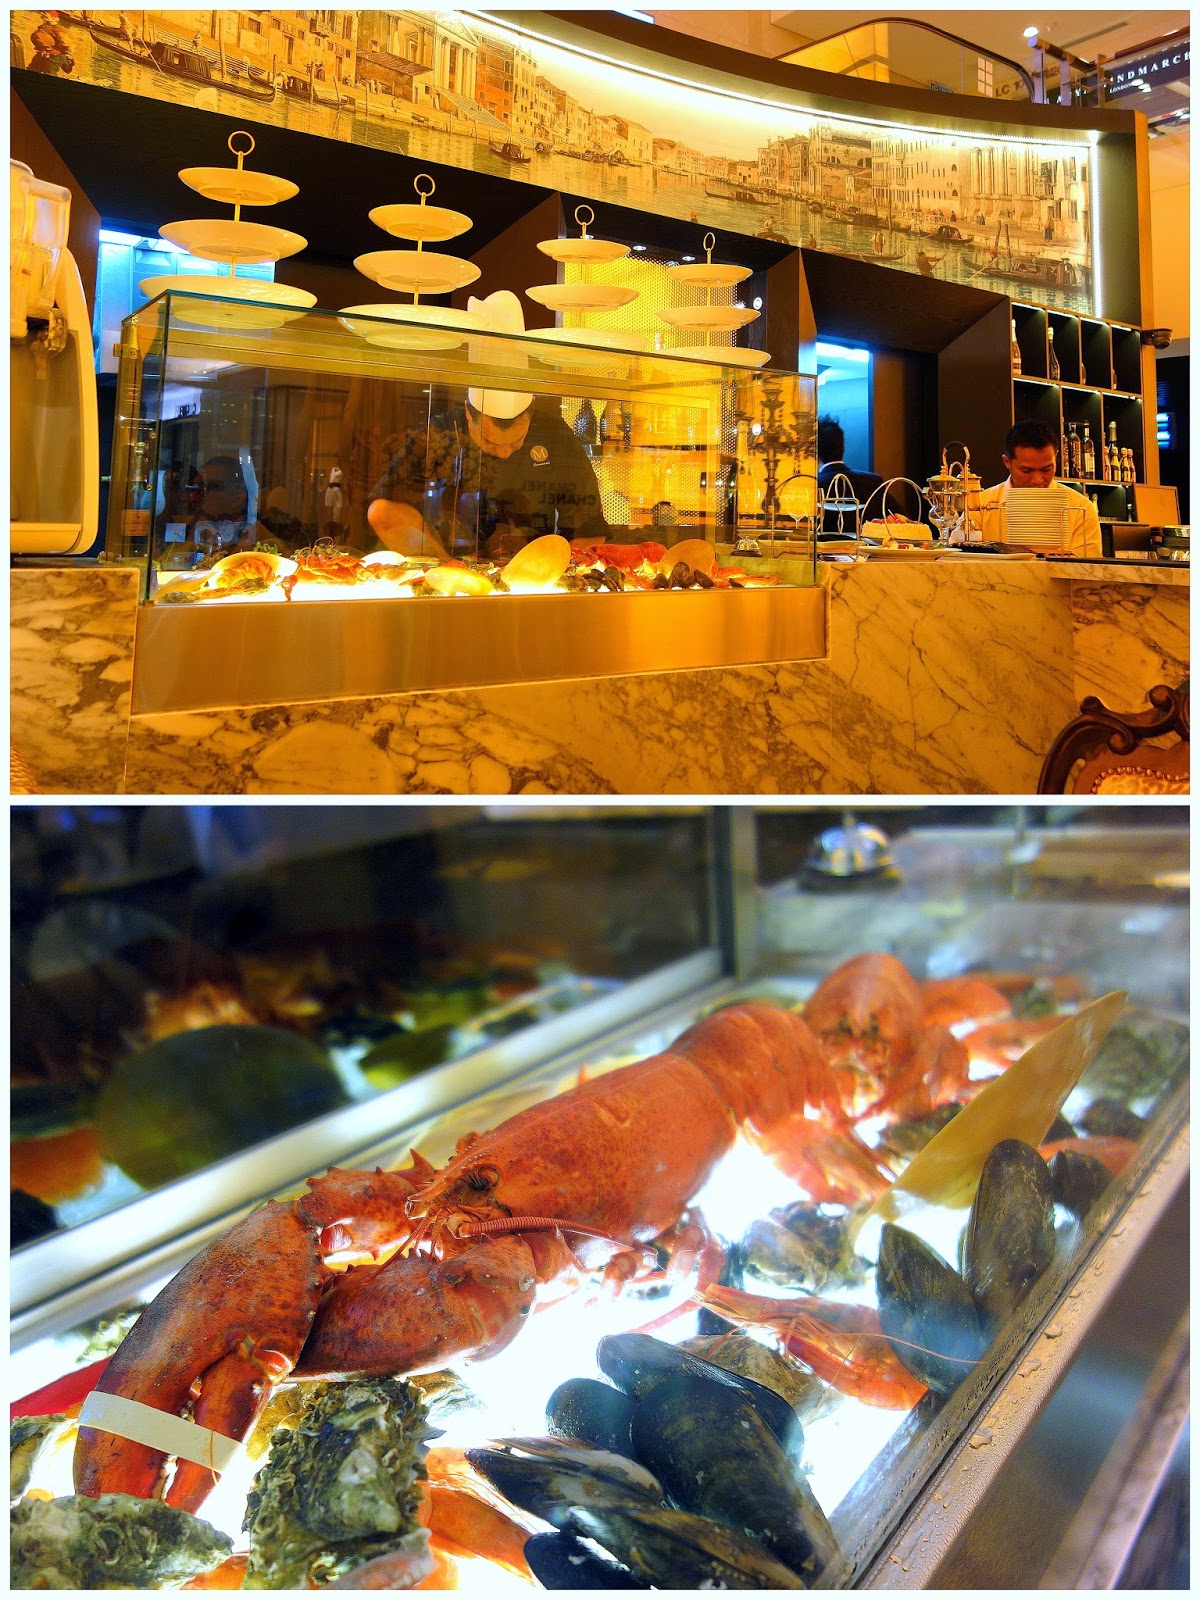 A crustacean bar occupies a place of pride here, with